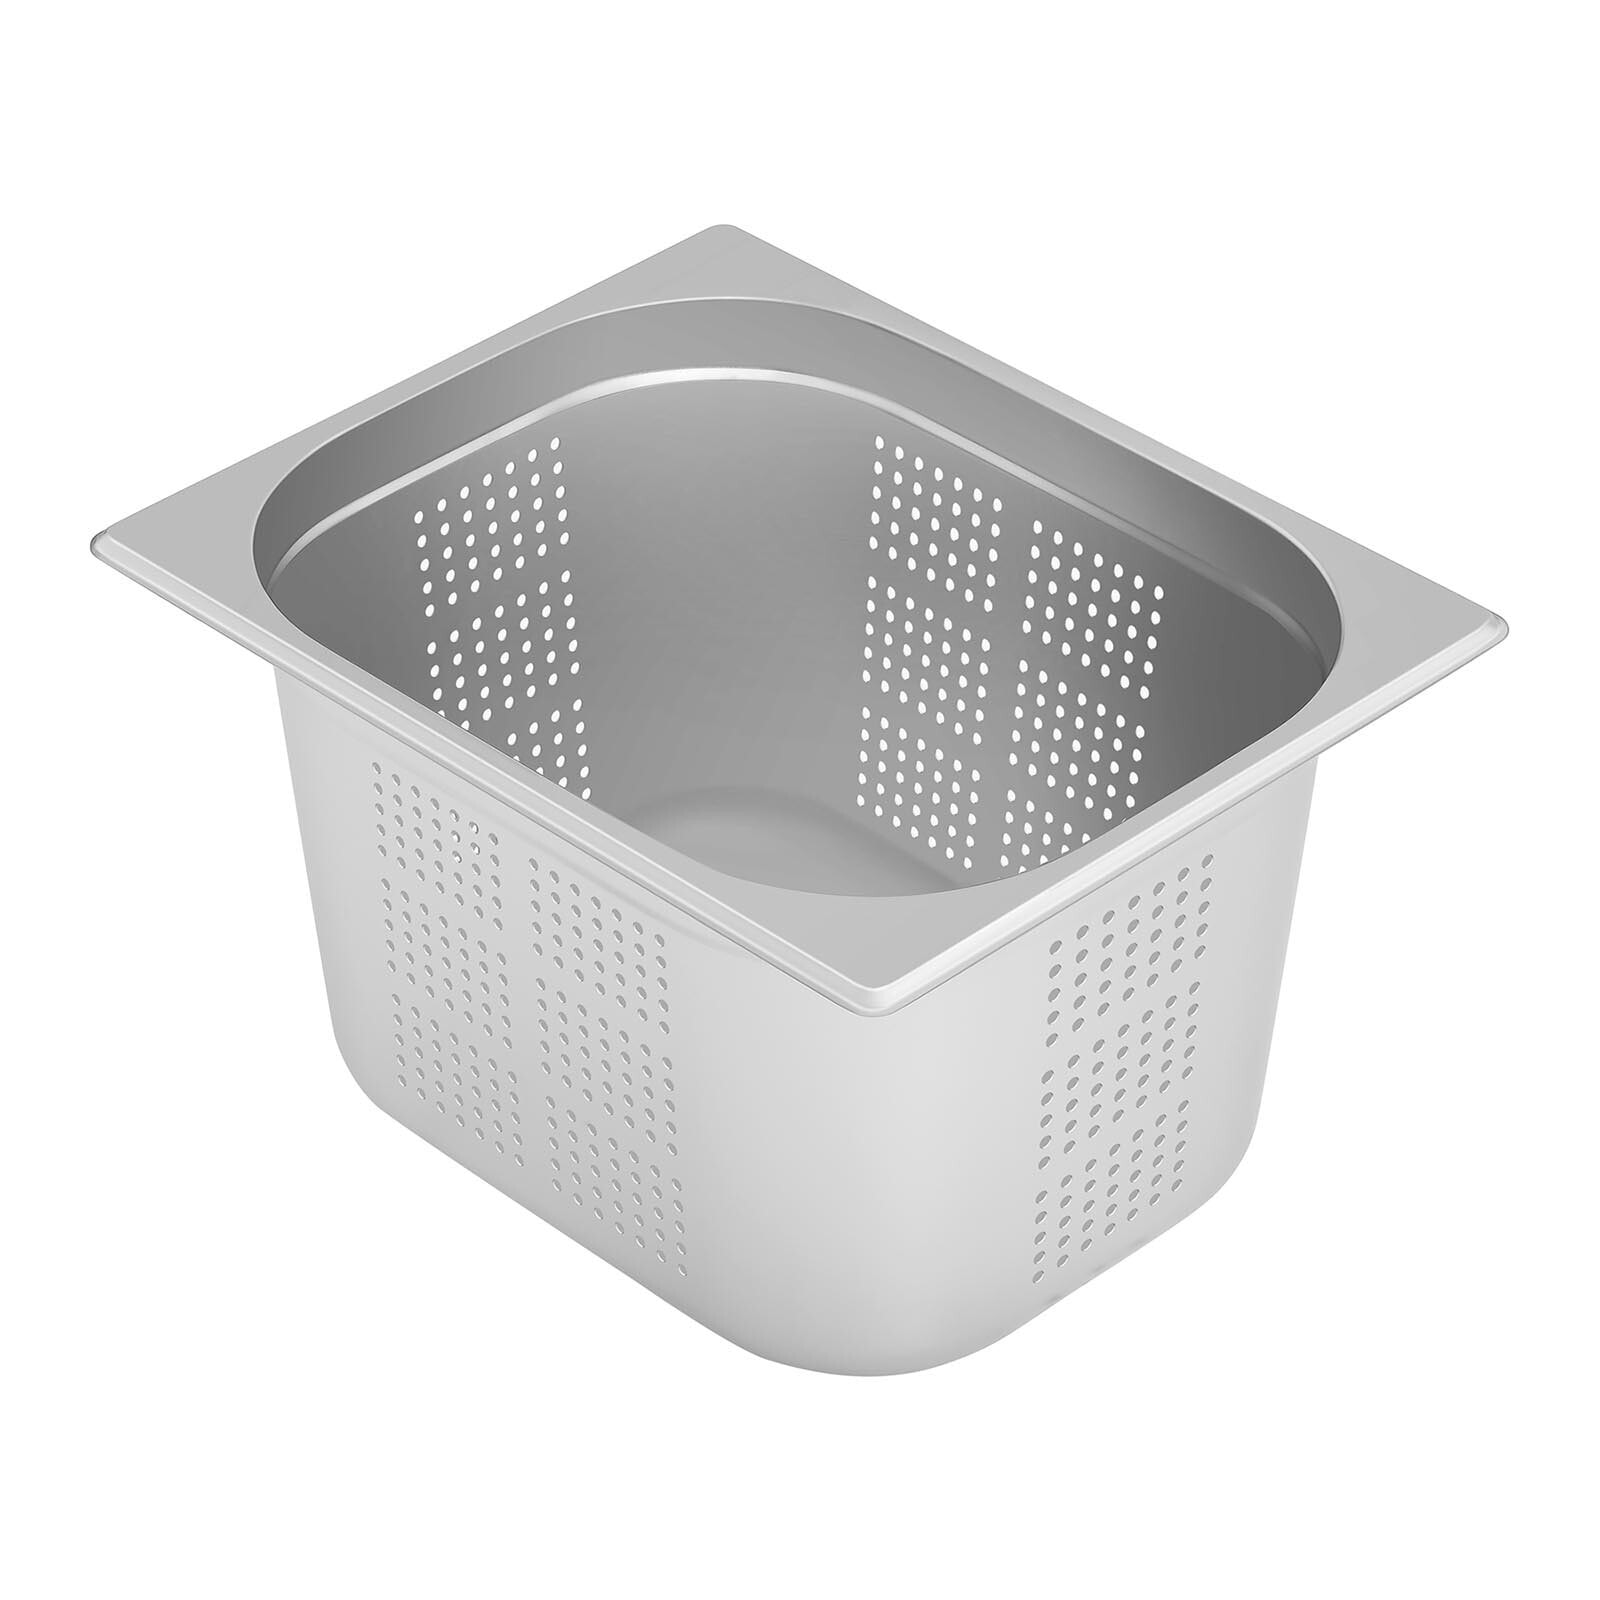 Perforated gastronomy dish made of steel GN1 / 2 depth. 200 mm